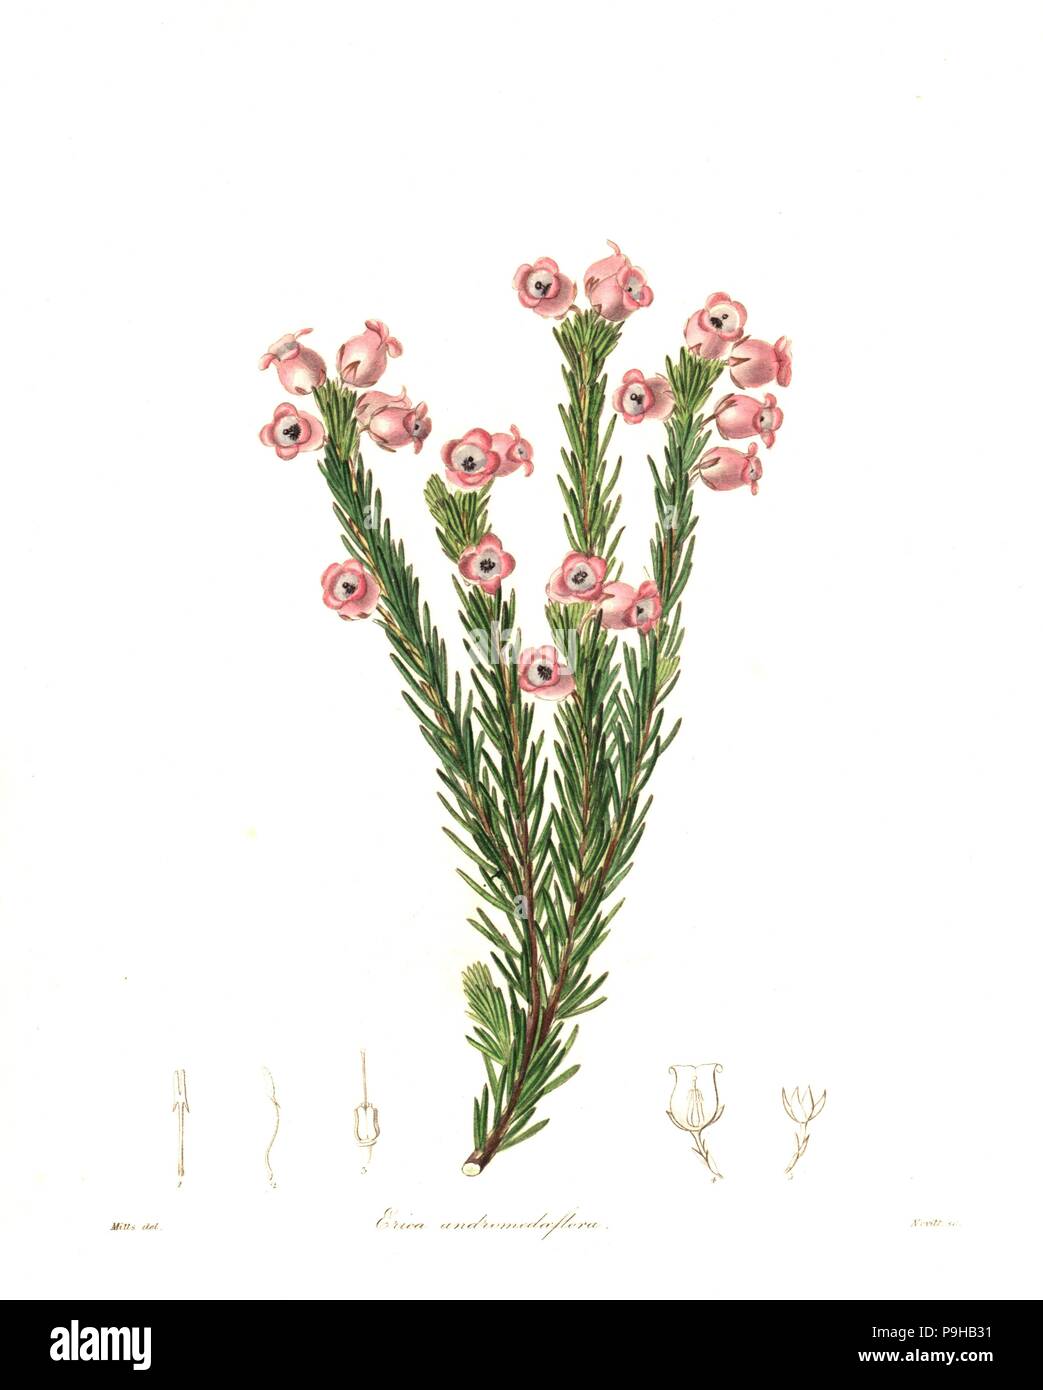 Erica holosericea (Andromeda-flowered heath, Erica andromediflora). Handcoloured copperplate engraving by S. Nevitt after a botanical illustration by Mills from Benjamin Maund and the Rev. John Stevens Henslow's The Botanist, London, 1836. Stock Photo